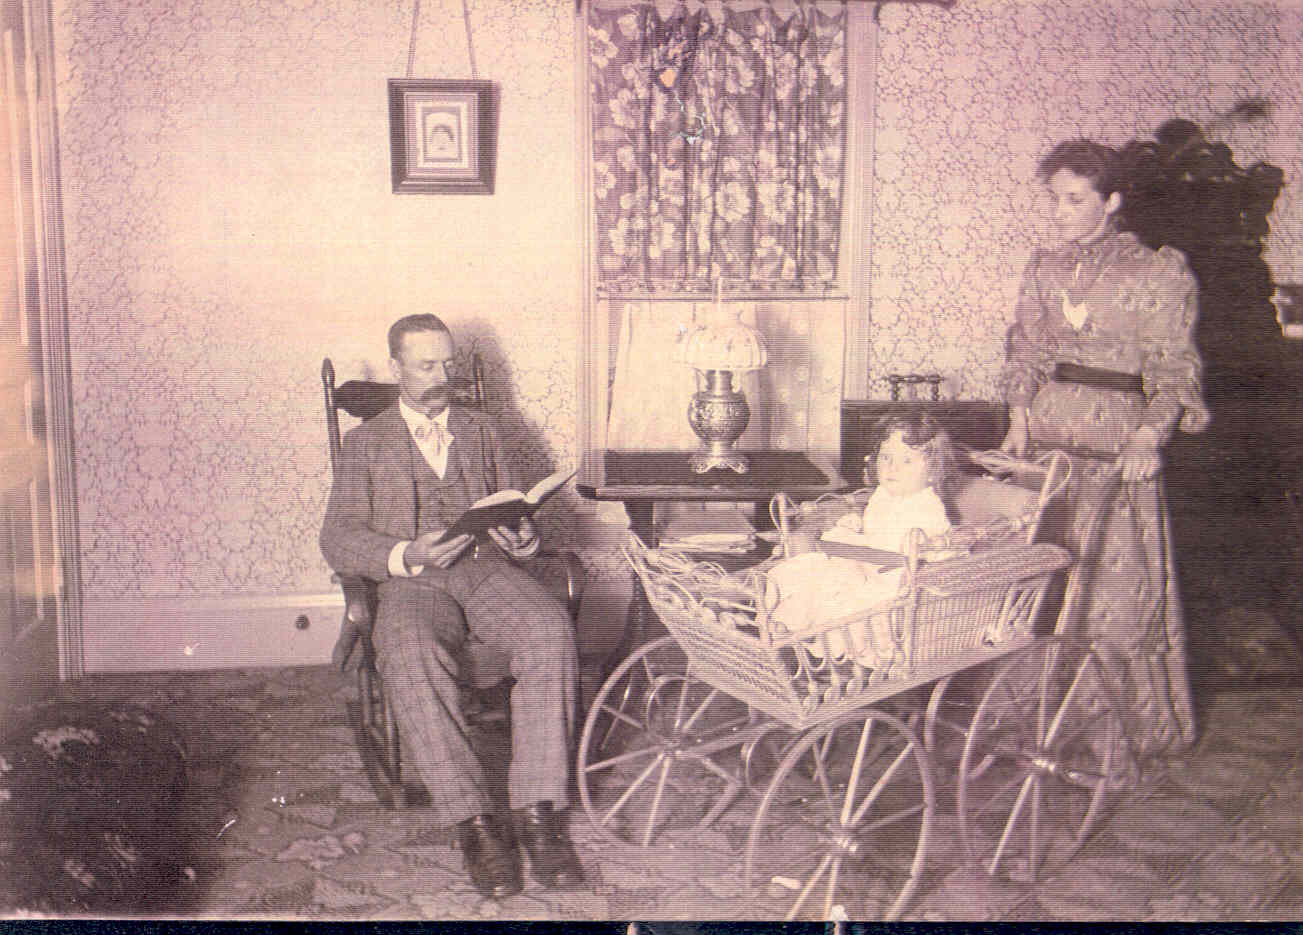 My great-great-grandfather Osborne Alexander Myers at home with his family. Michigan, circa 1893.